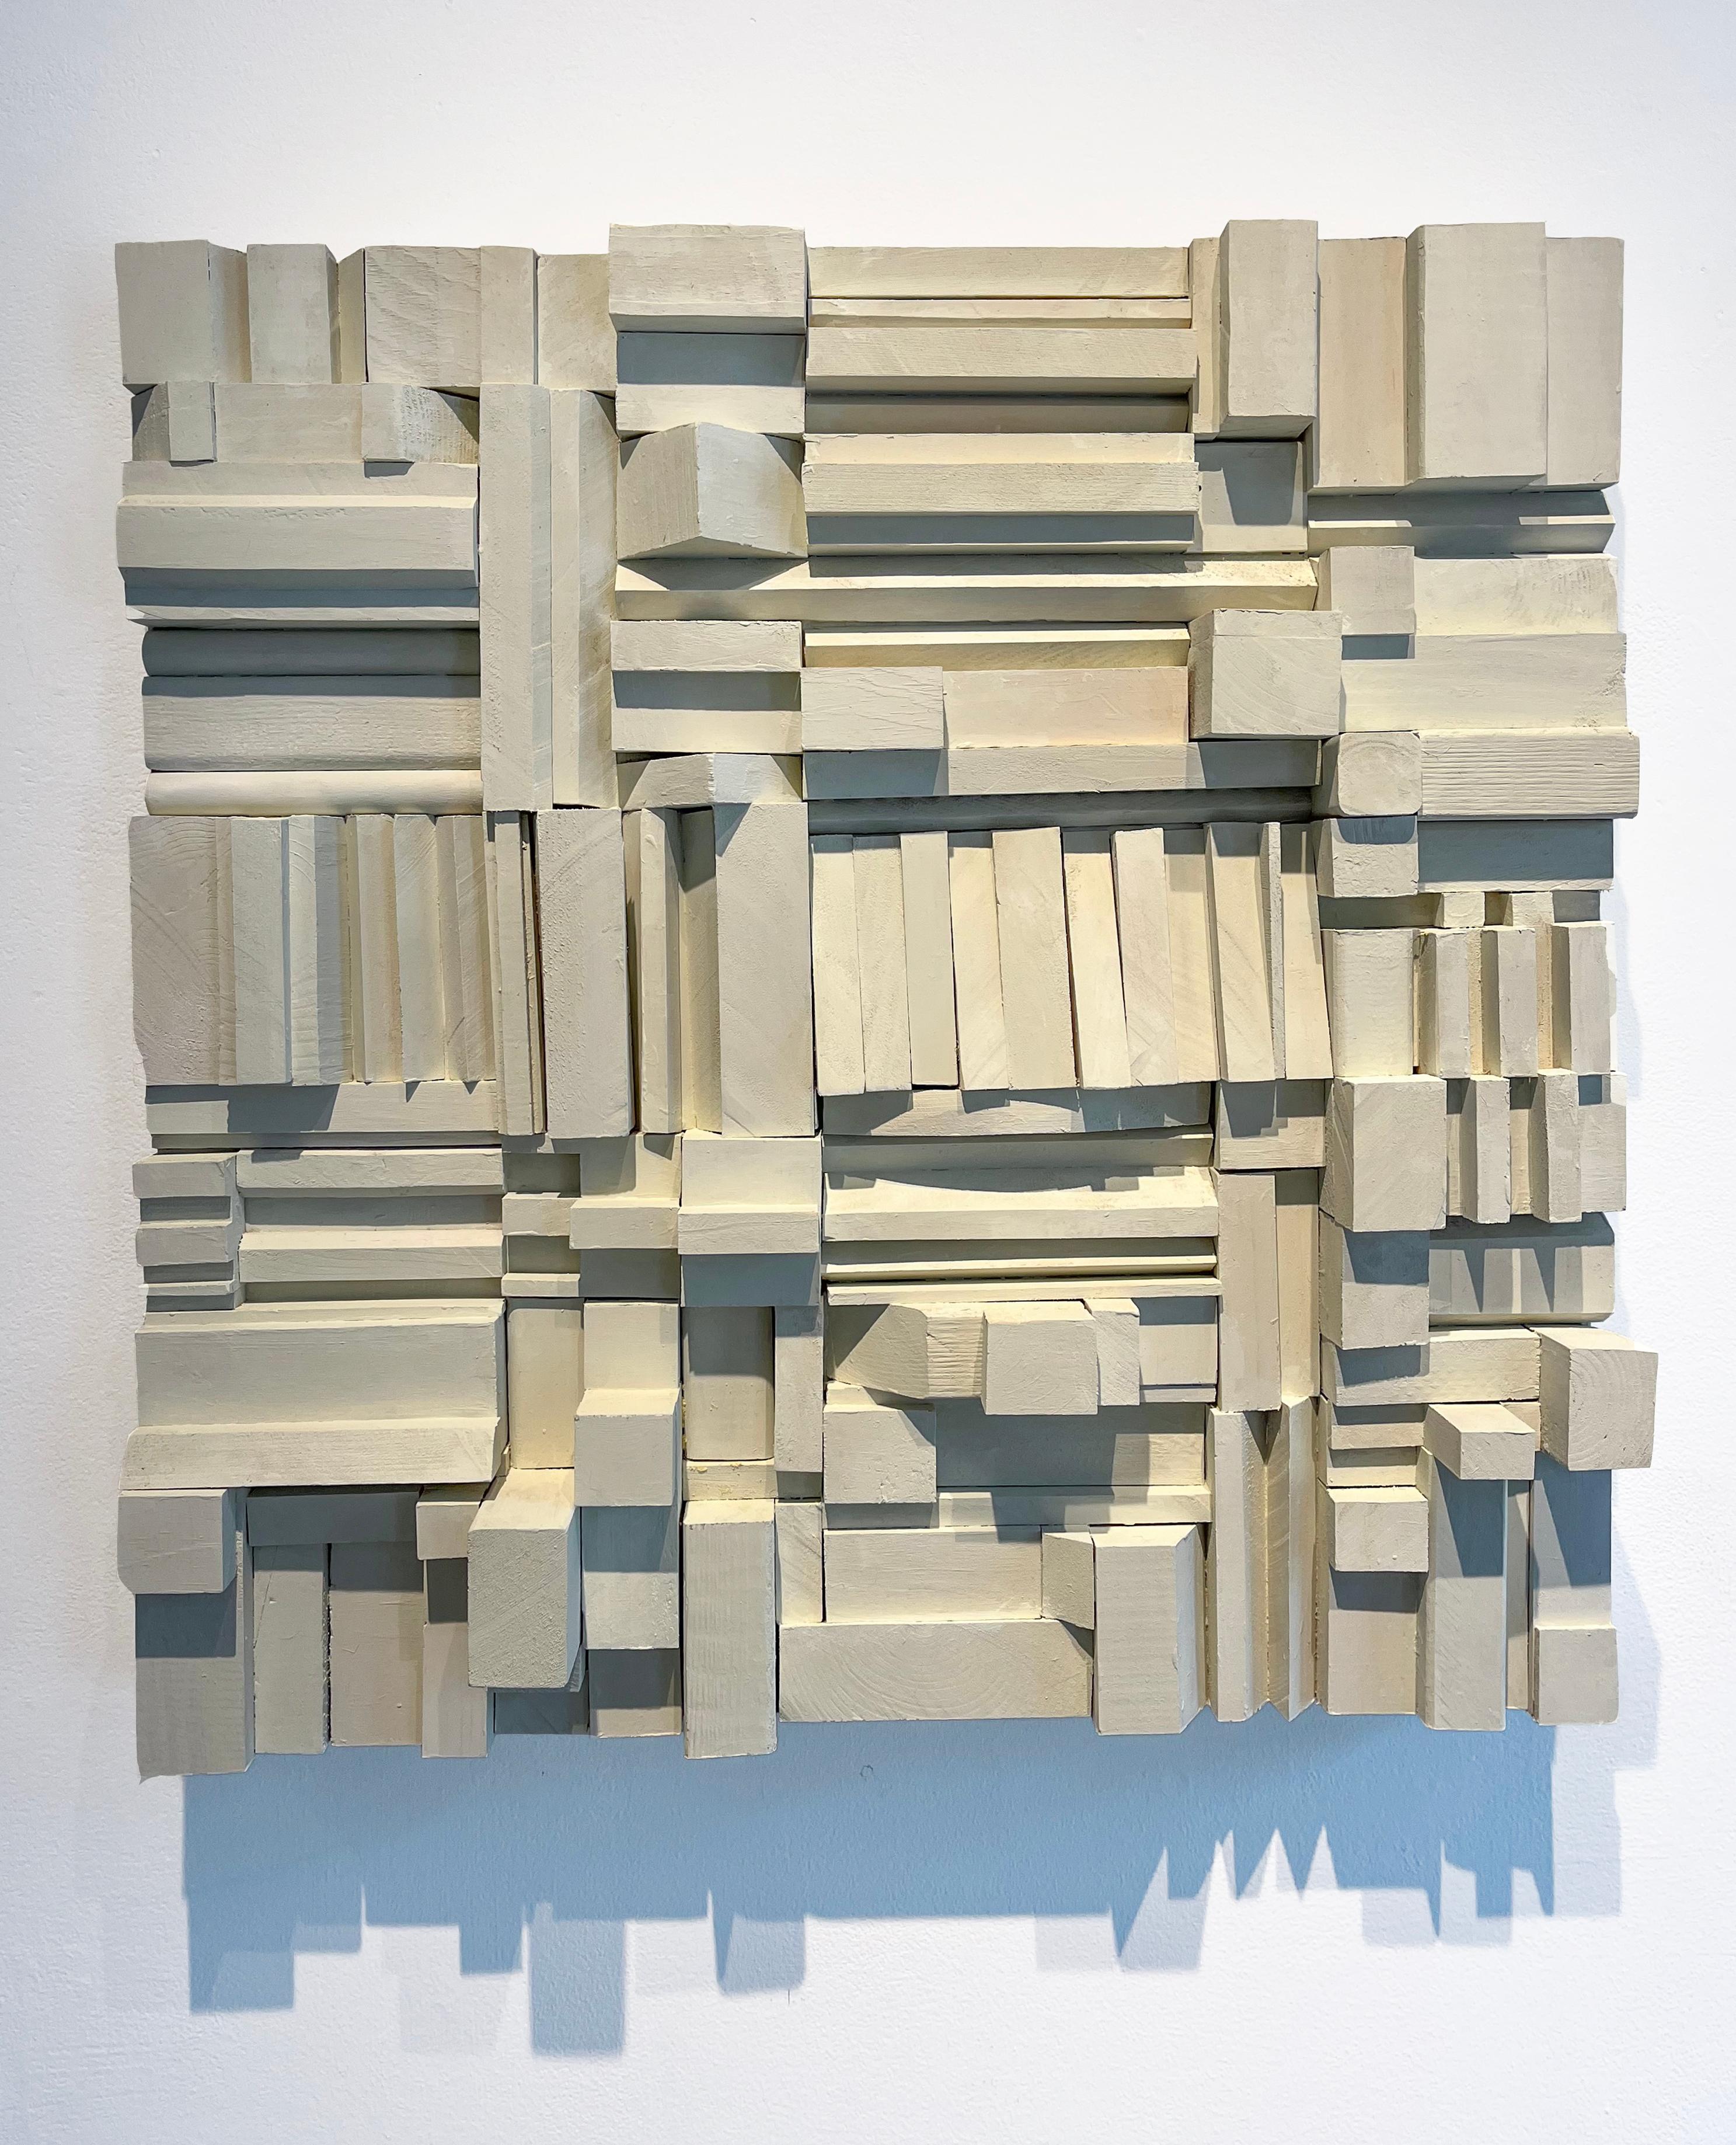 Abstract, minimalist three-dimensional wood wall sculpture in a soft off-white
